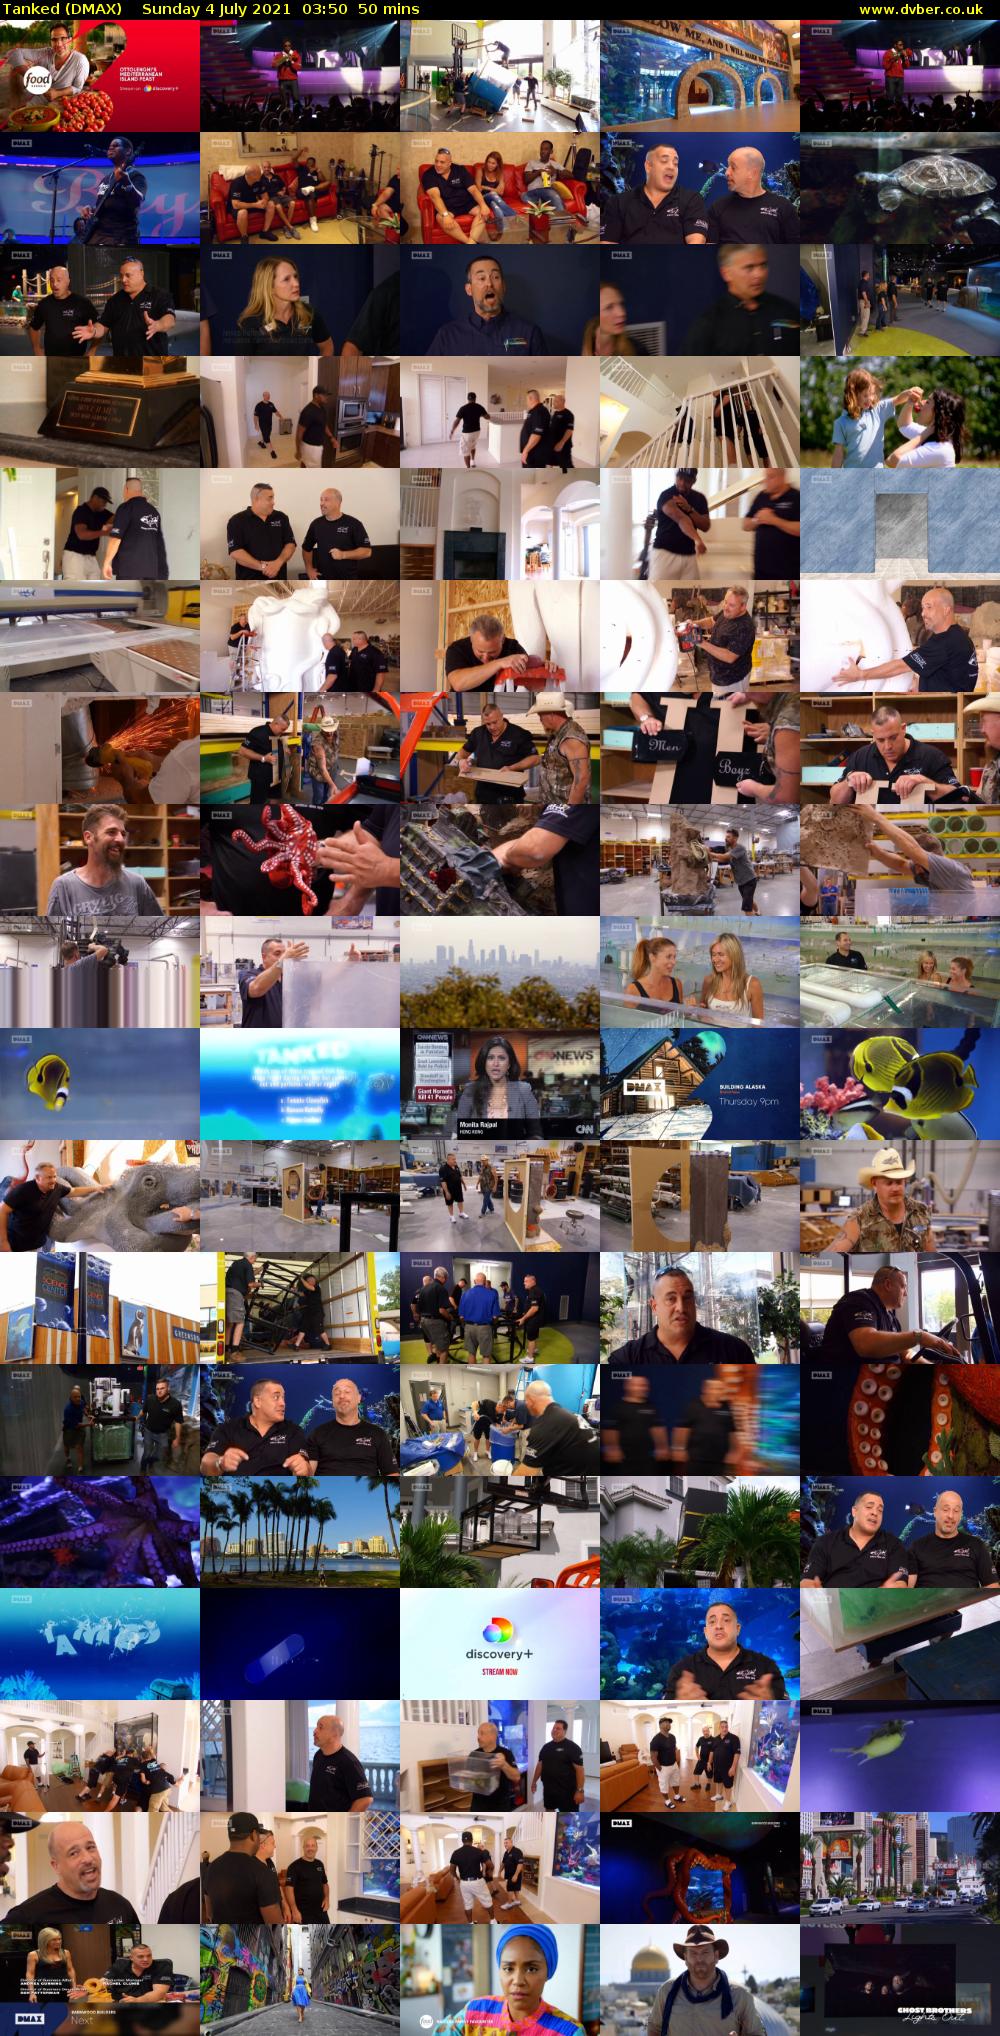 Tanked (DMAX) Sunday 4 July 2021 03:50 - 04:40